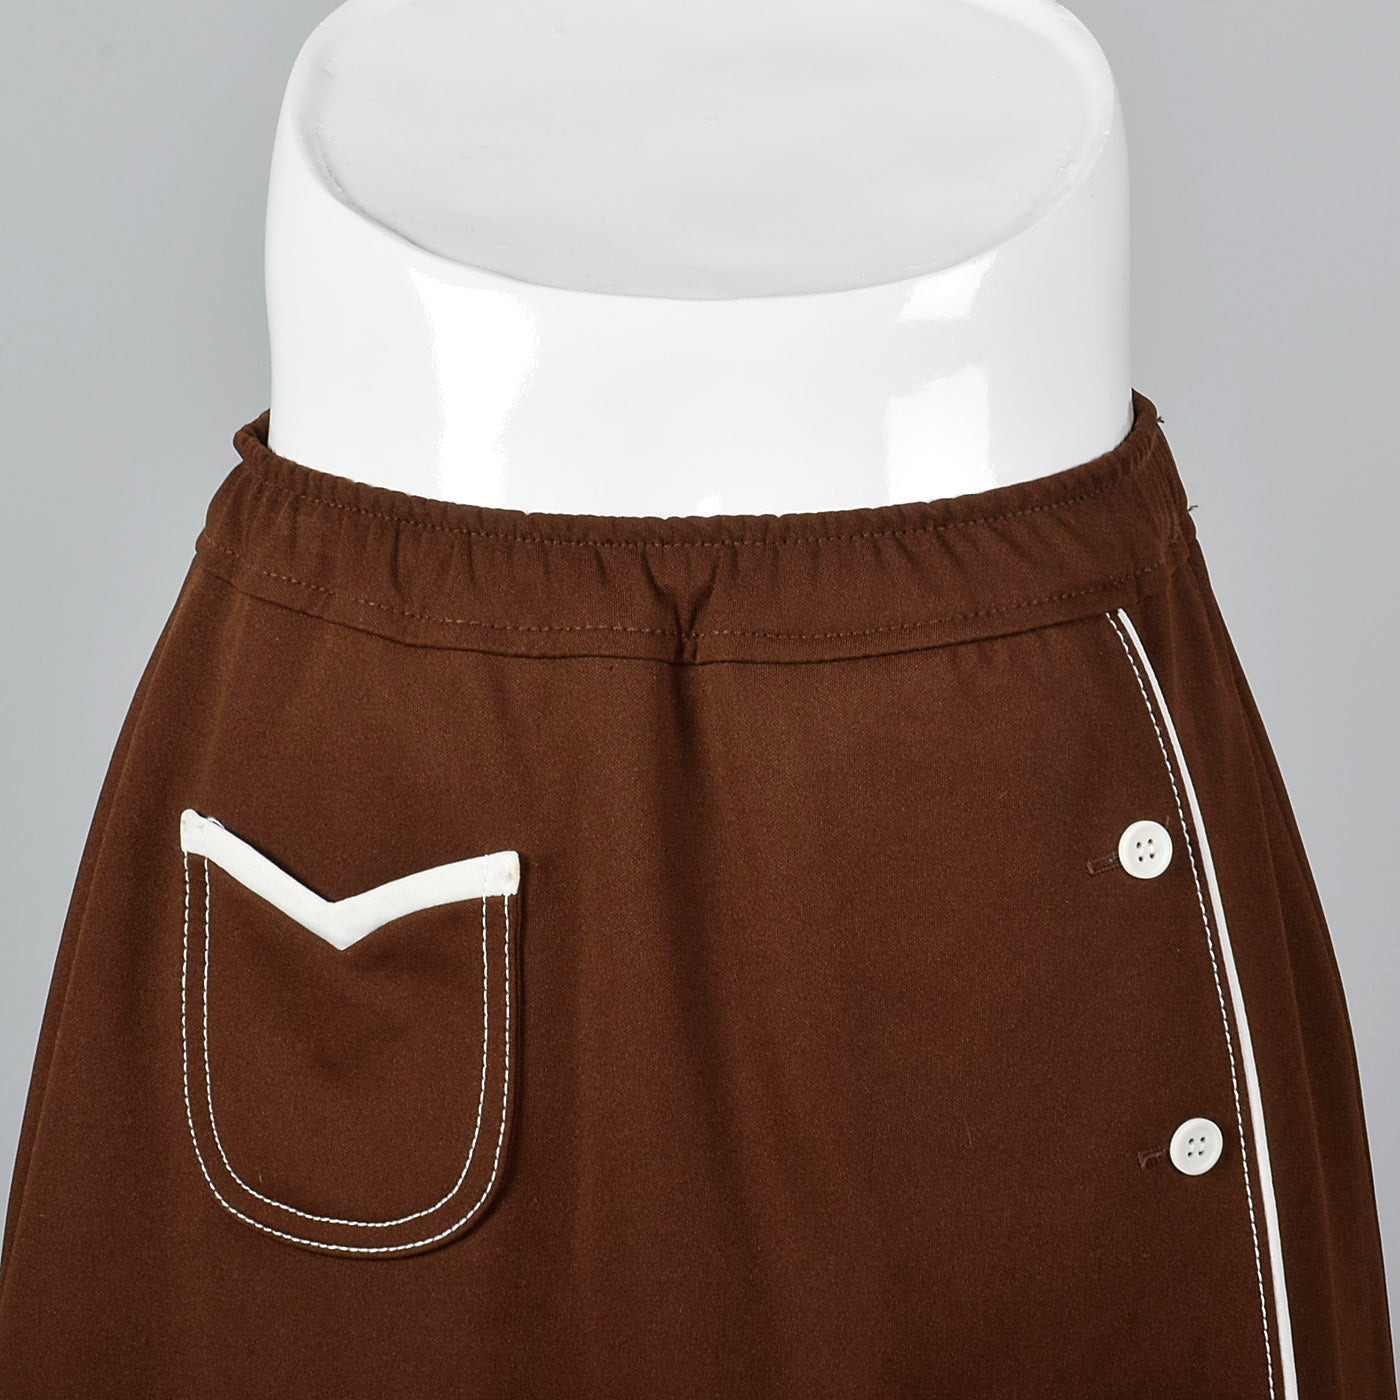 1960s Brown Skirt with Shorts